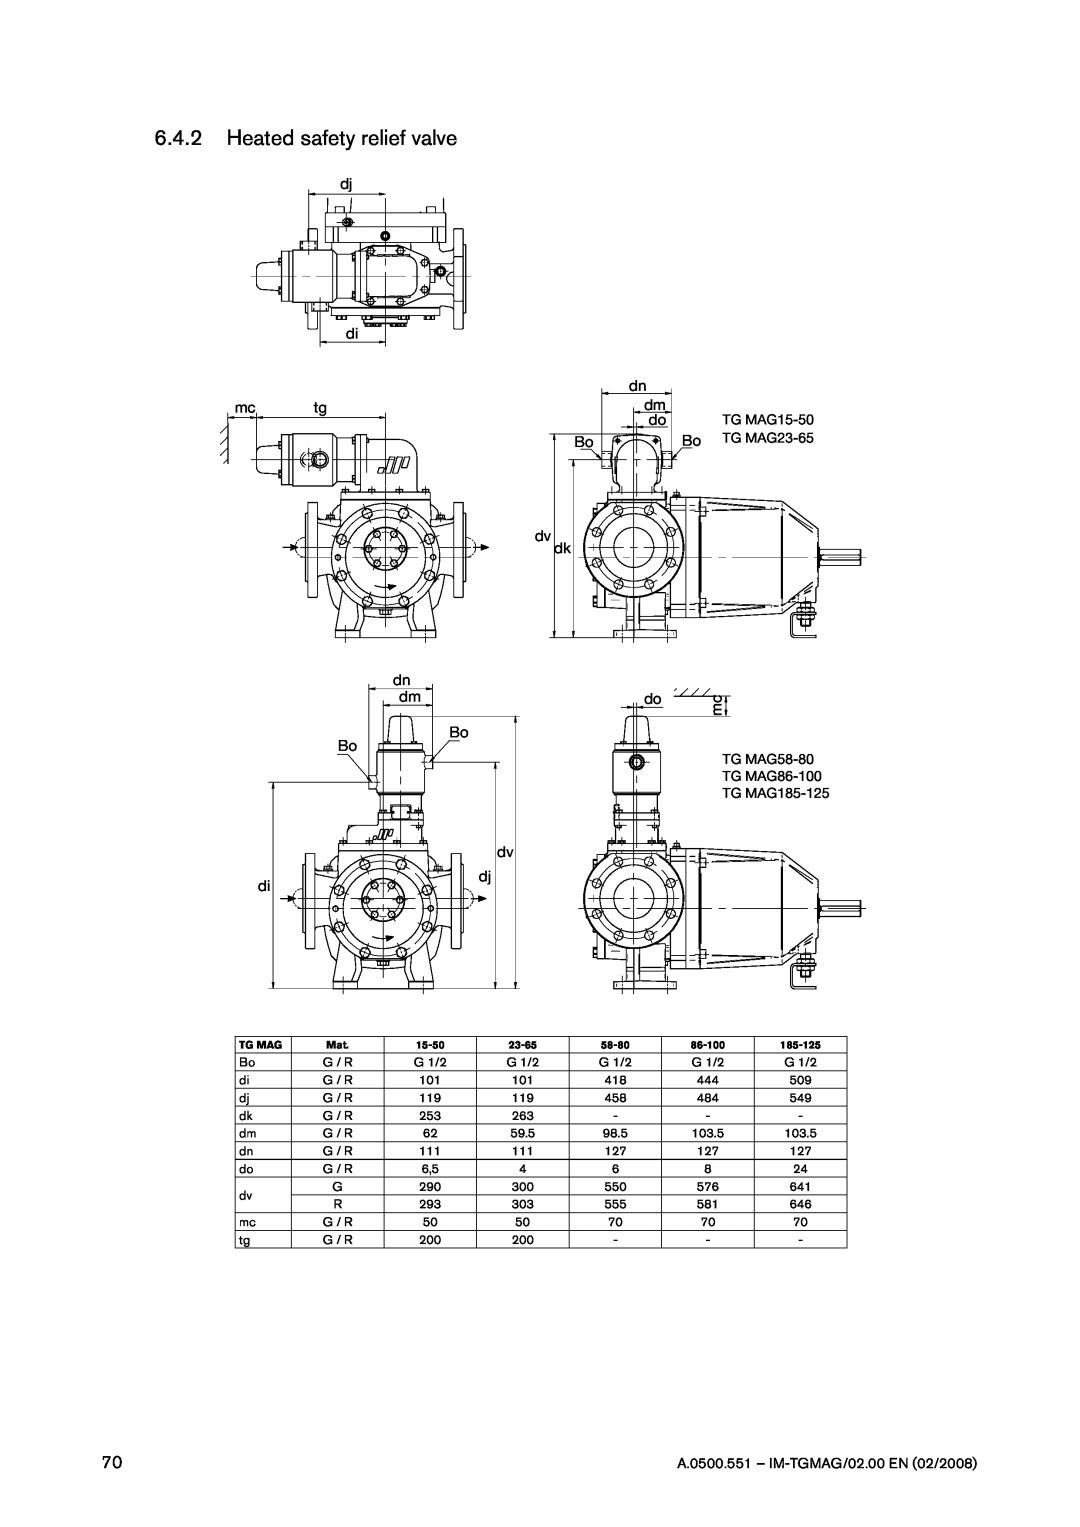 SPX Cooling Technologies TG MAG185-125, TG MAG15-50, TG MAG58-80, TG MAG23-65, TG MAG86-100 6.4.2Heated safety relief valve 